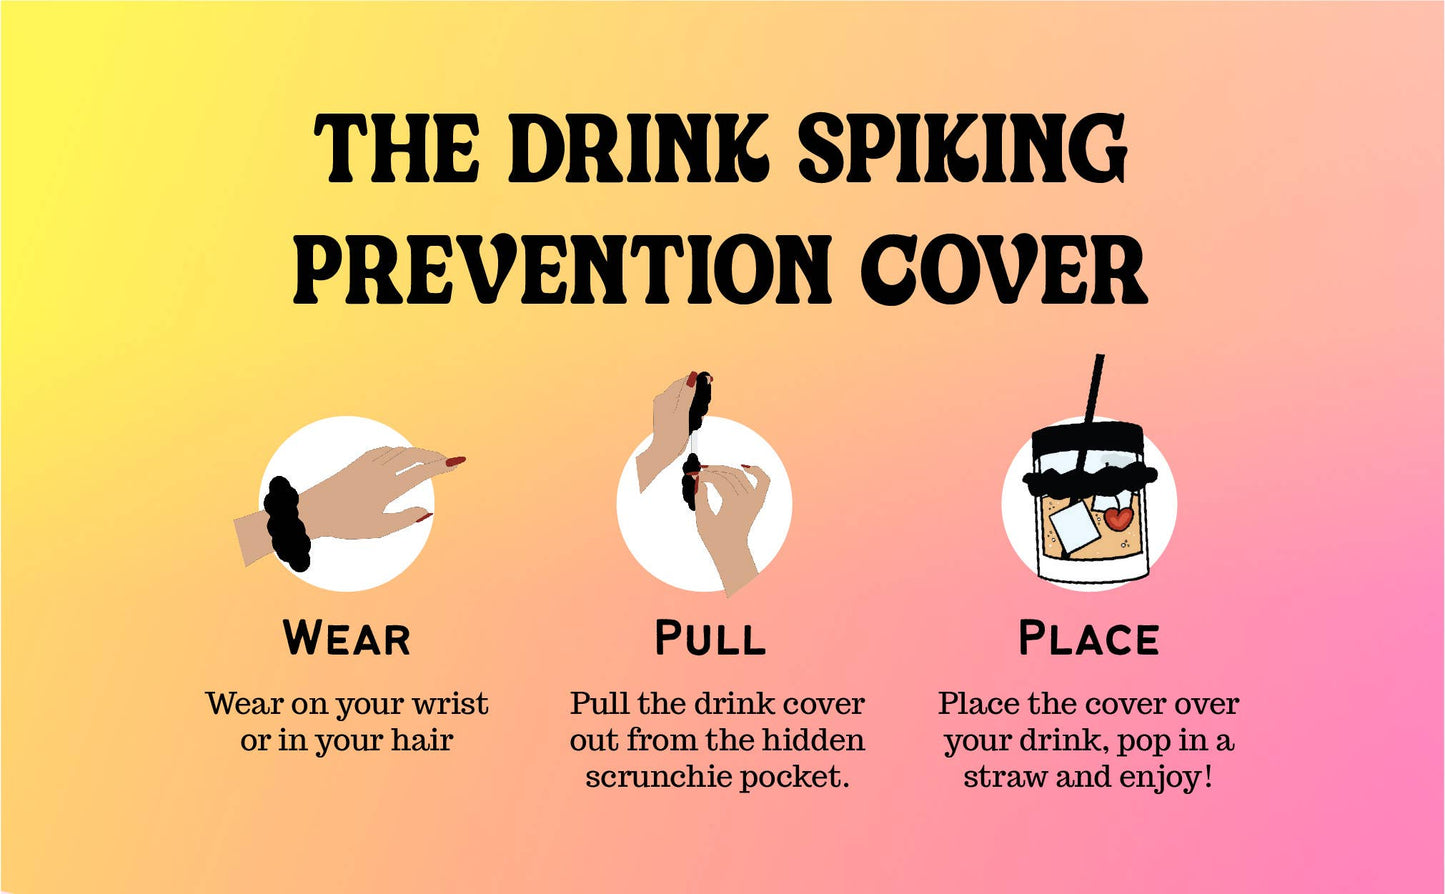 Drink Spiking Prevention Cover